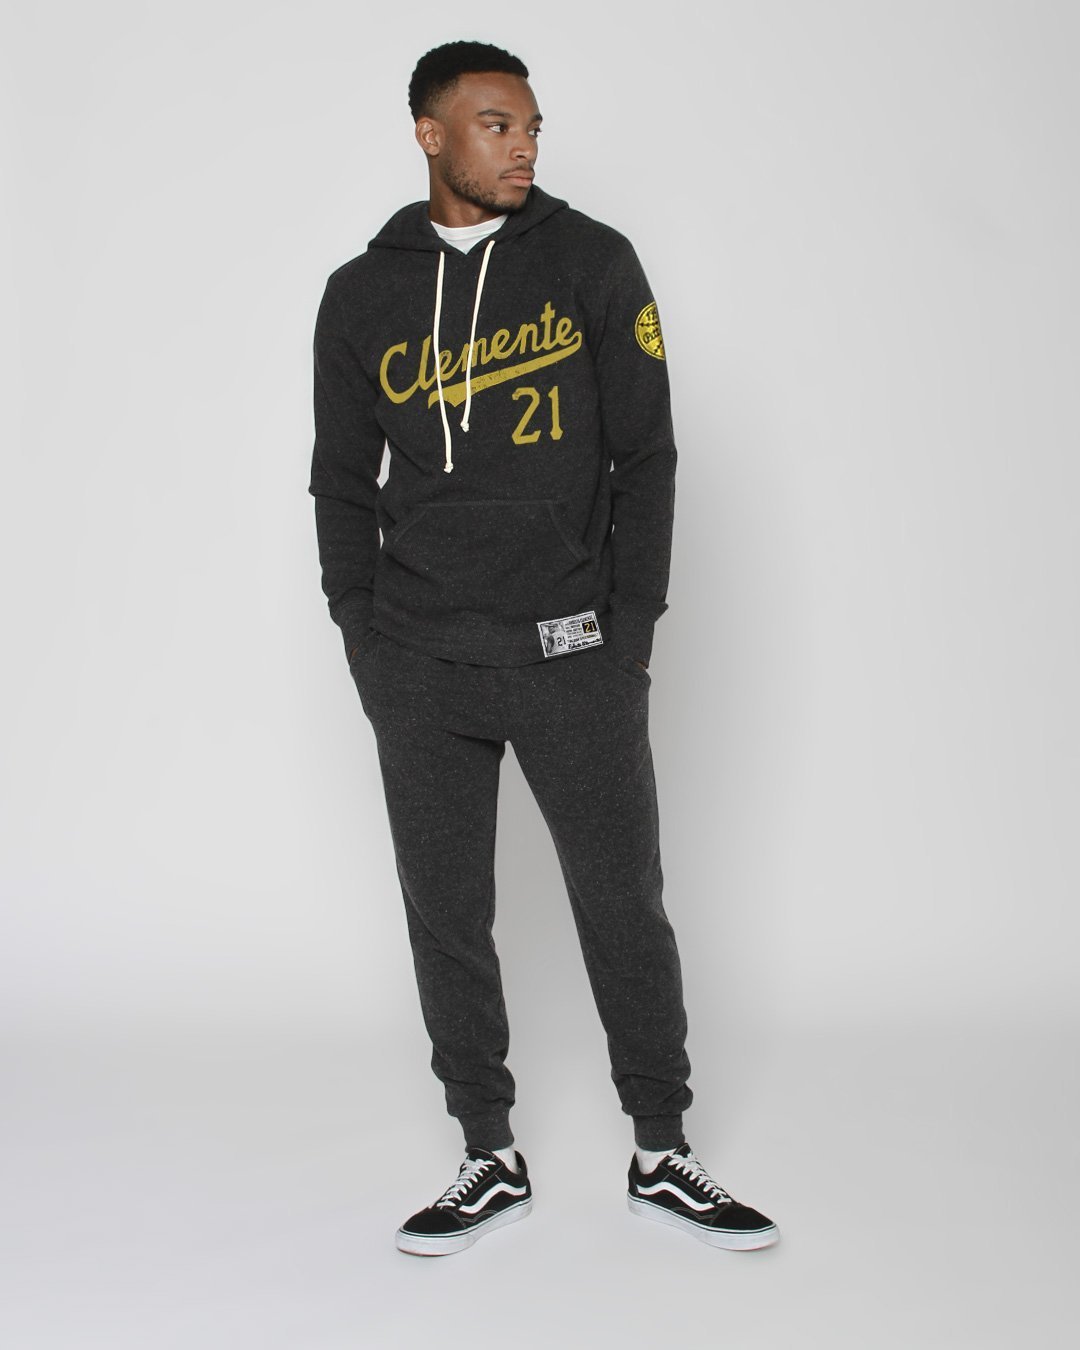 Roberto Clemente #21 Pullover Hoody - Roots of Fight Canada